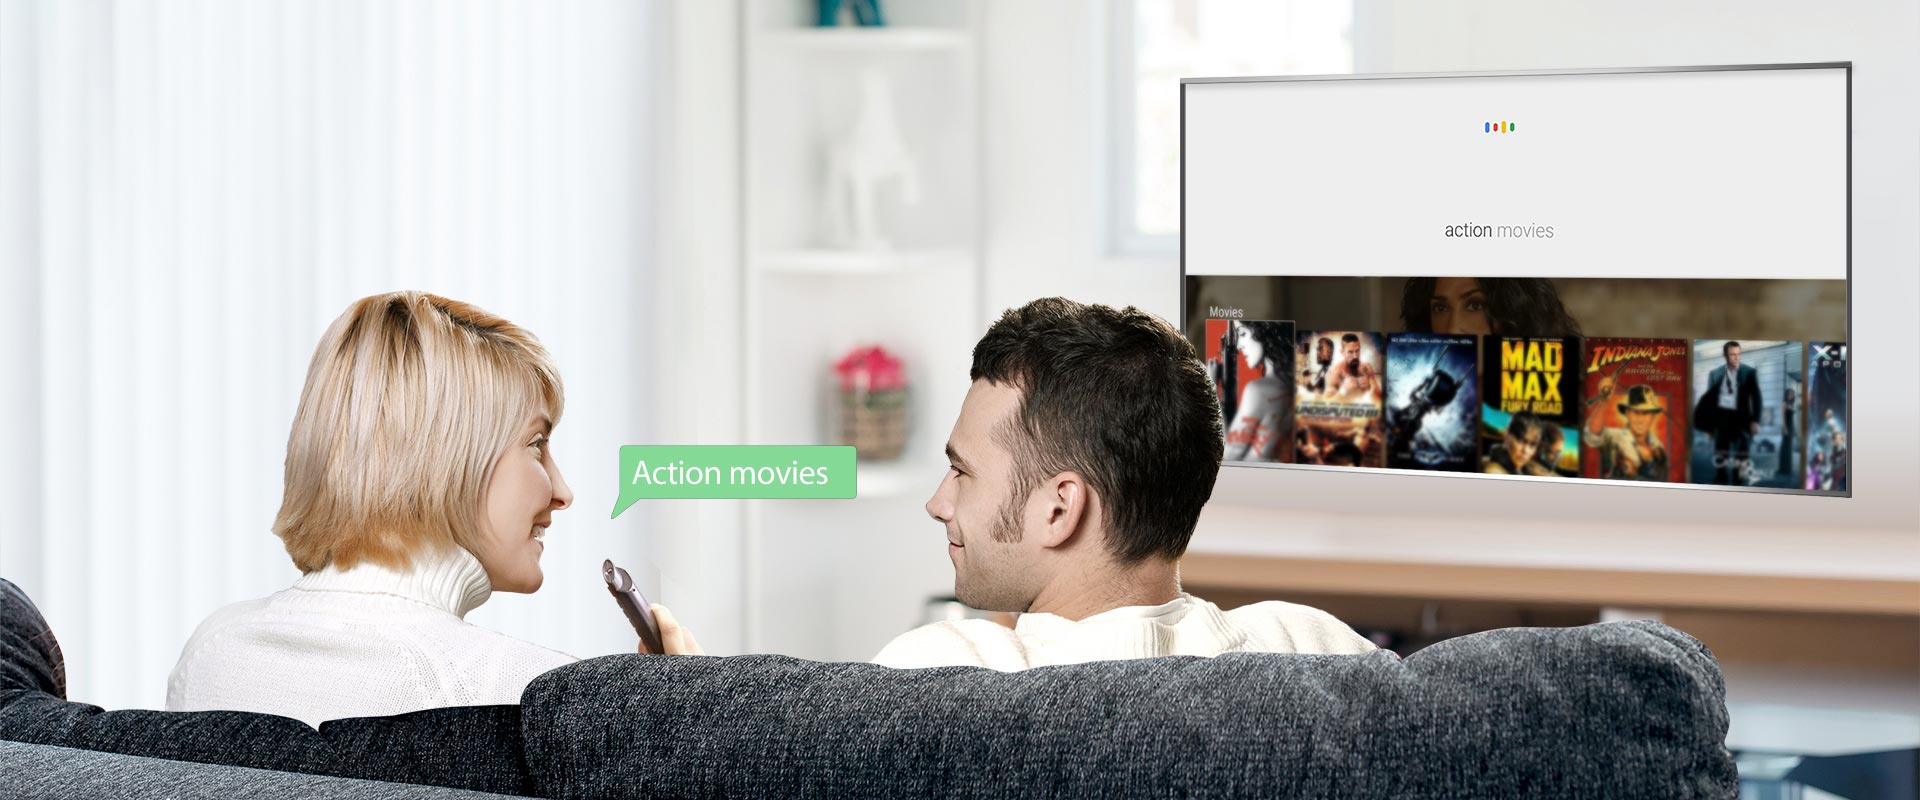 Voice Search S45A TV